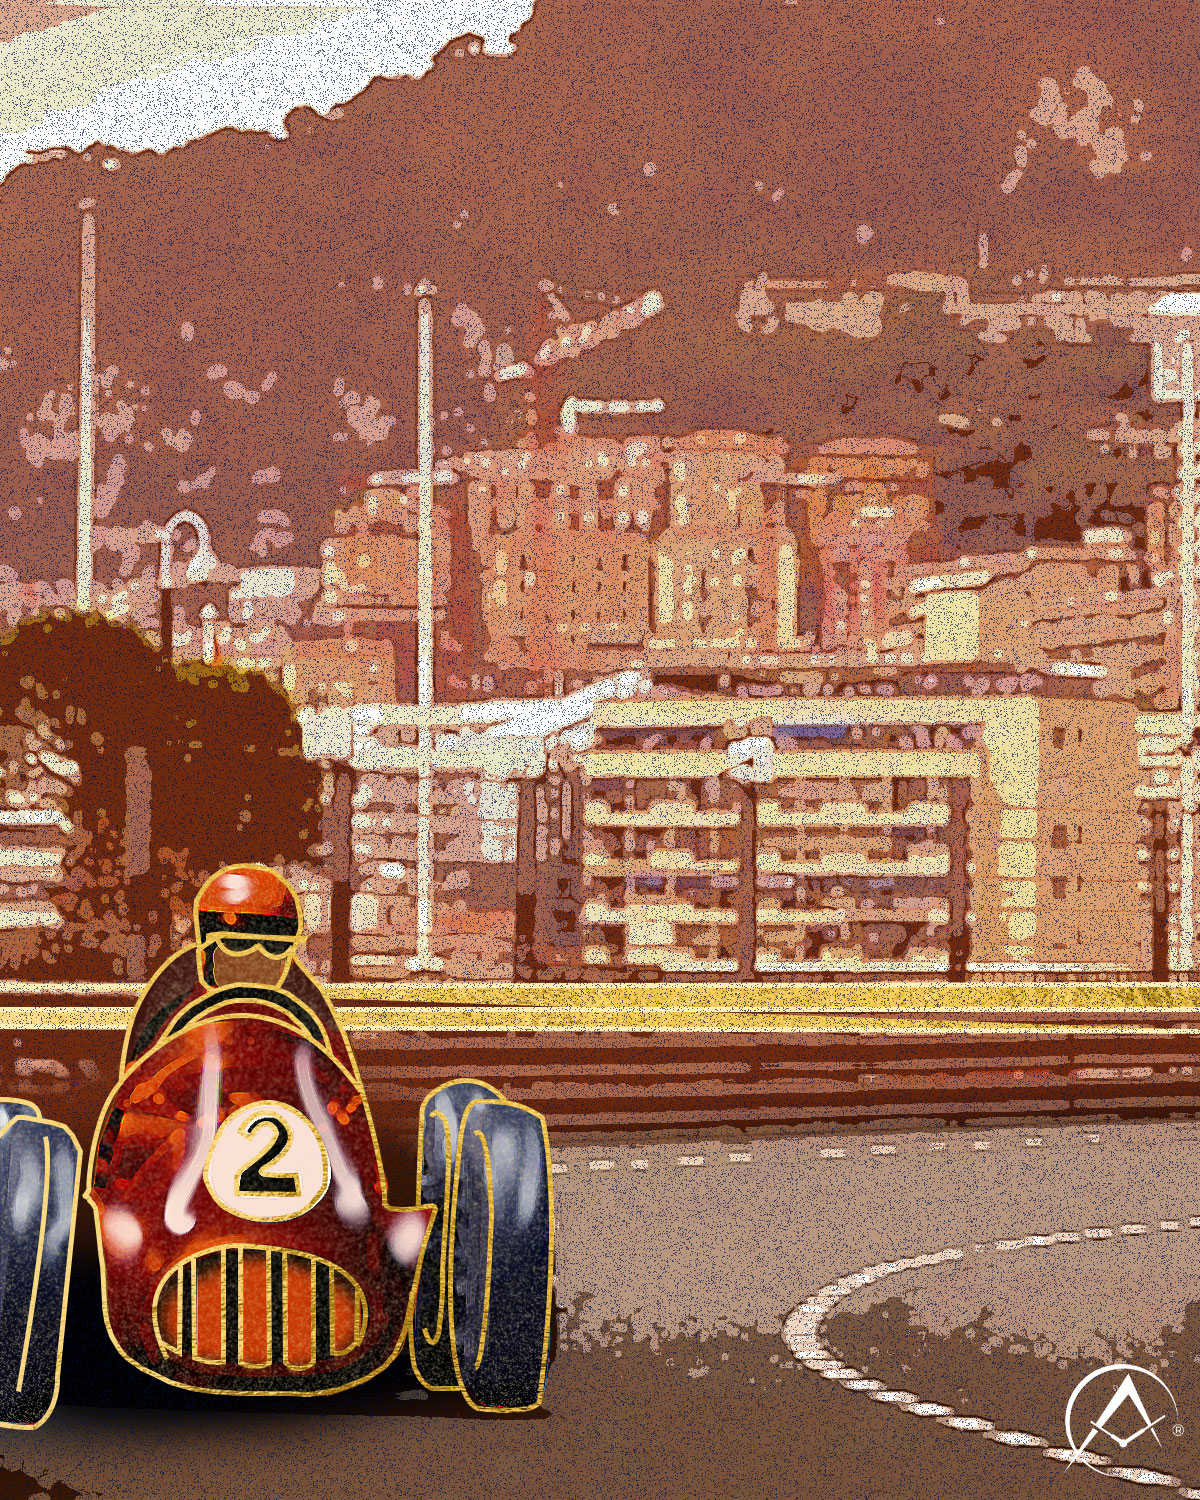 A Racecar Driver in a Red #2 Car on a Highway with Buildings in the Background in a Sepia Color to Represent Patek Philippe’s Grand Prix Calatrava.